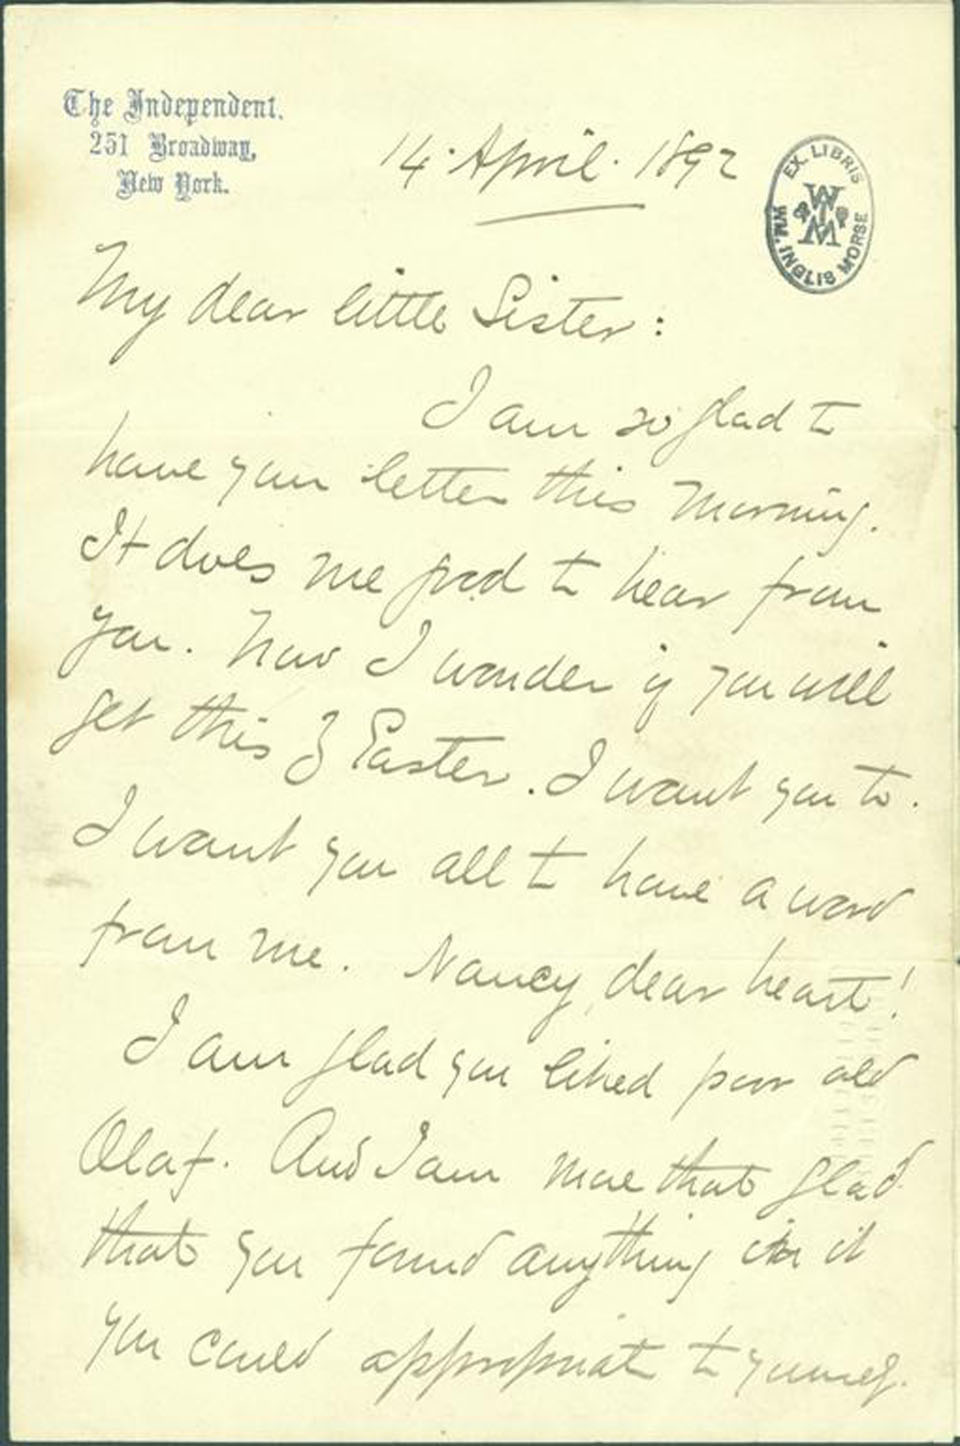 Letter from Bliss Carman to Annie L. Prat, concerning the role of poetry in expressing universal grief and sorrow, and the deaths of Samuel Prat and Goodridge Bliss Roberts